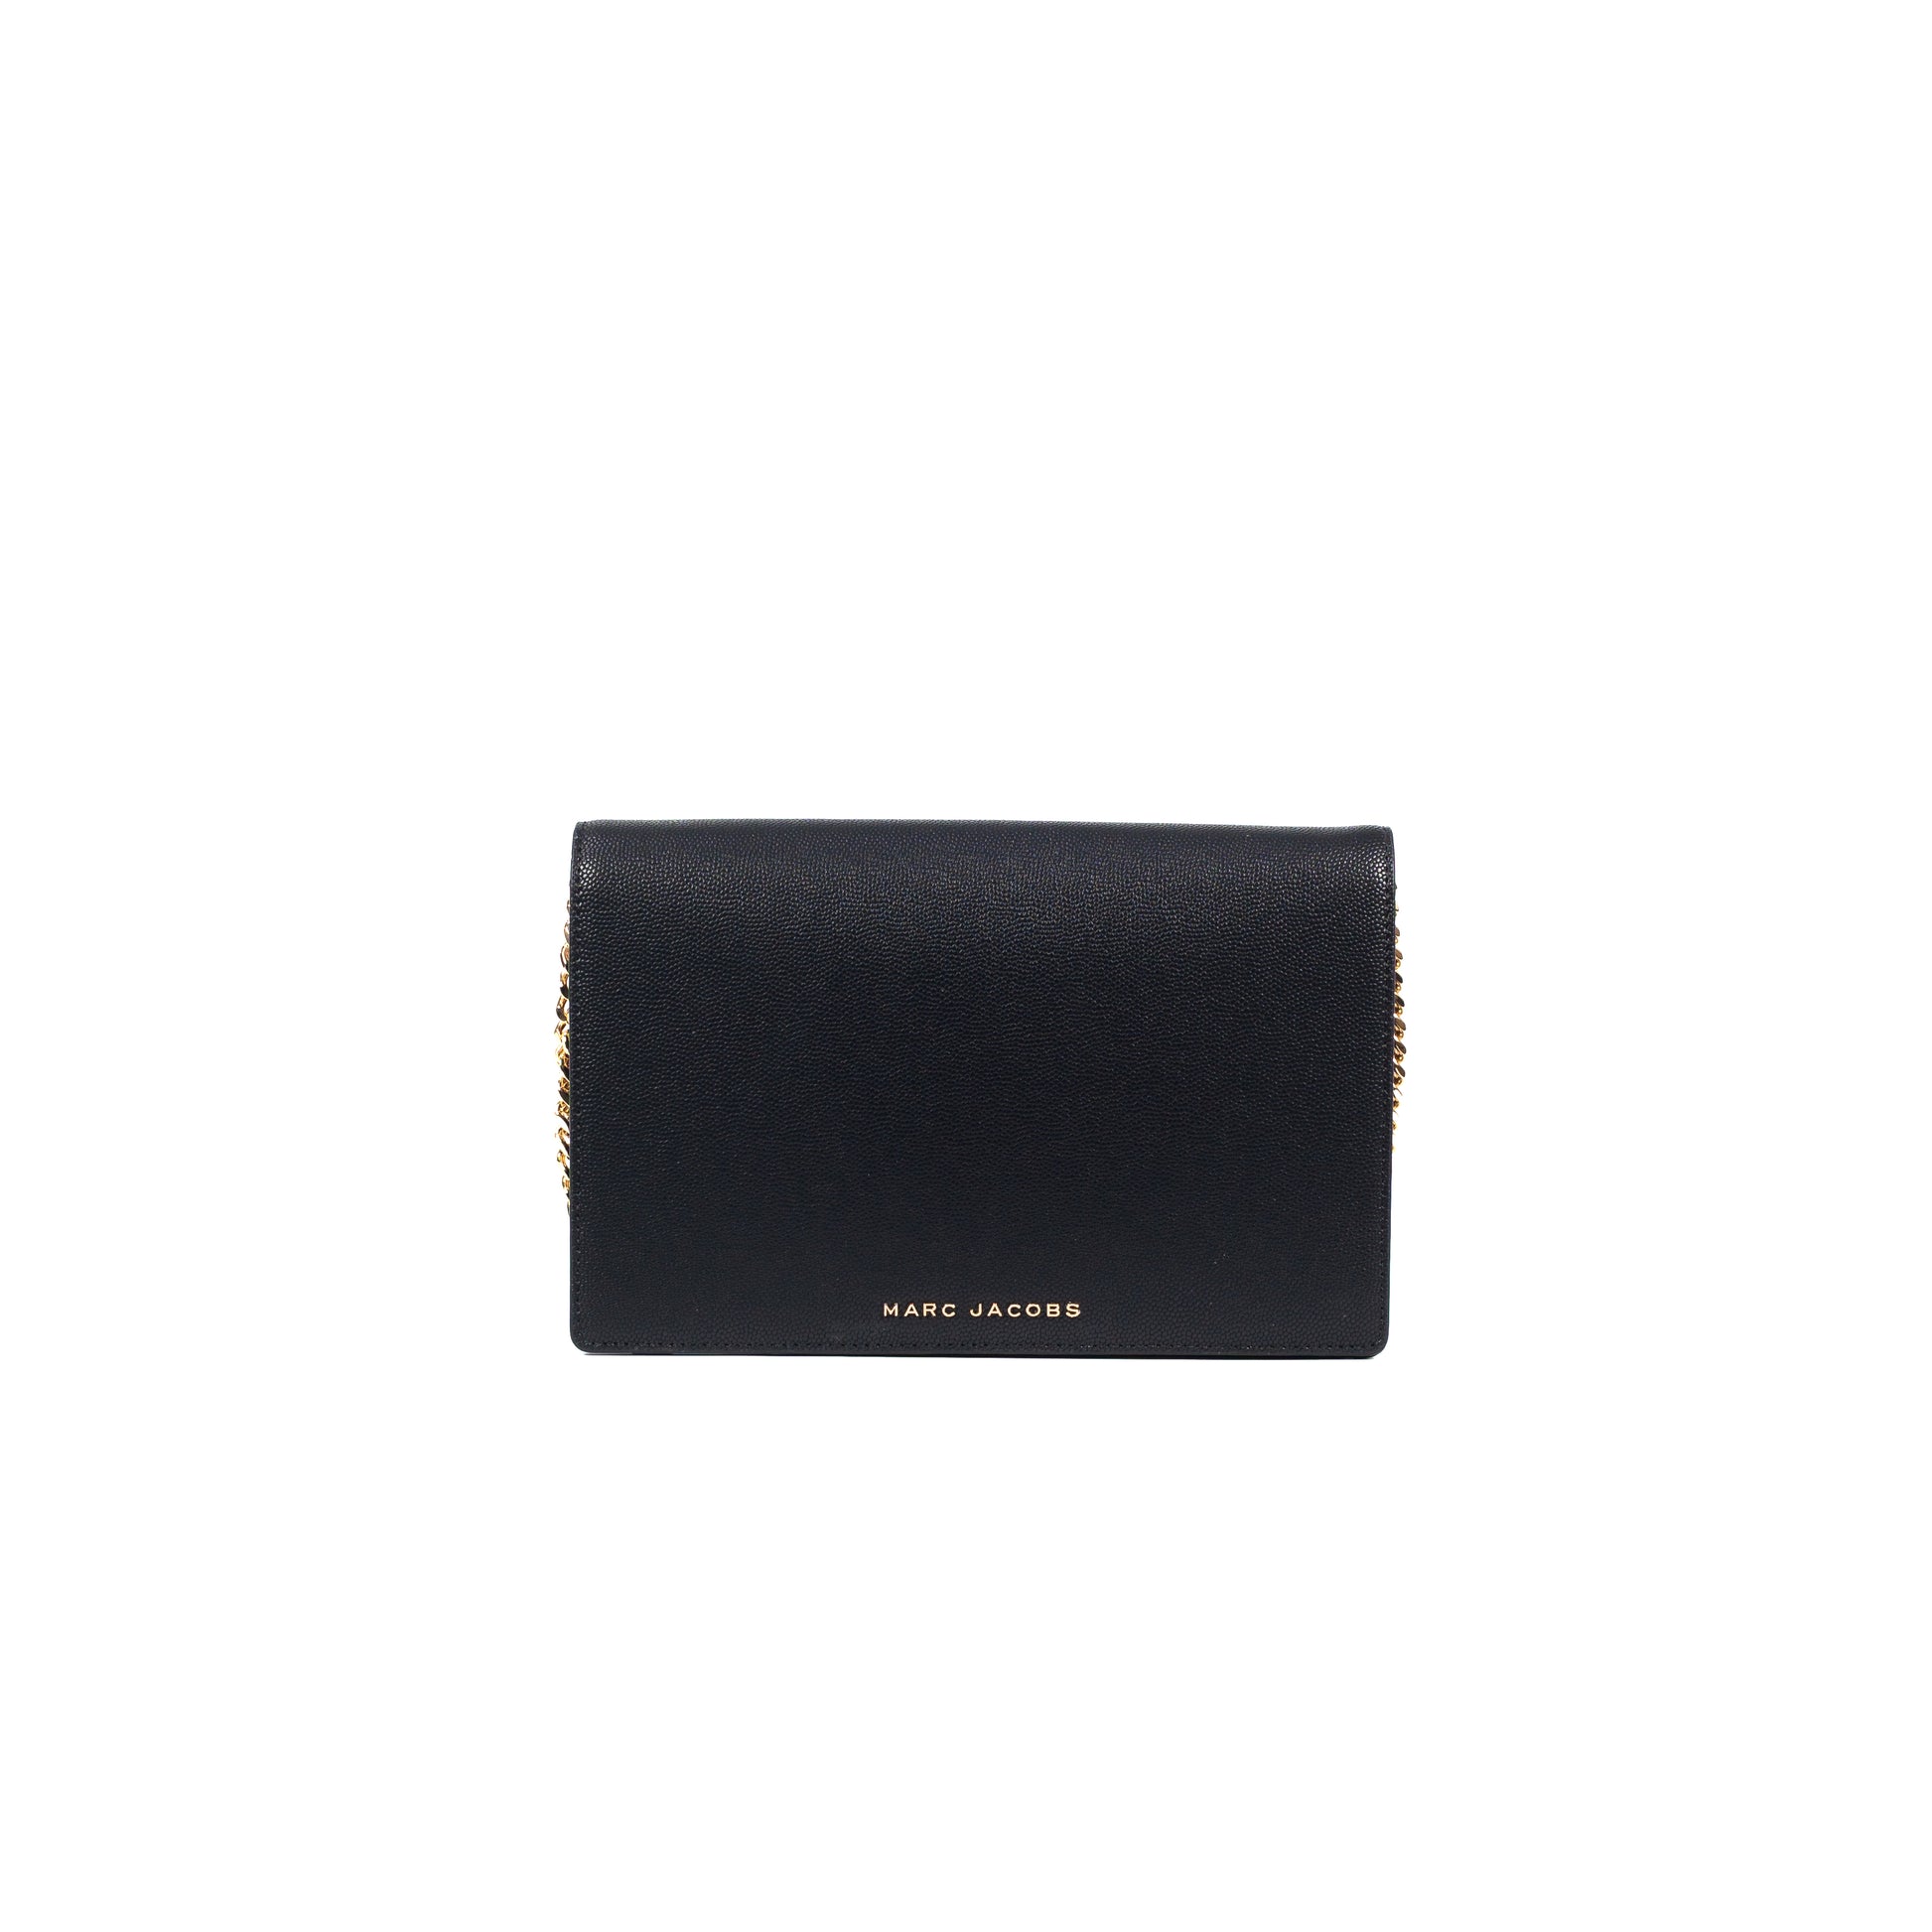 Marc Jacobs Women's Black Faux Leather Chain Crossbody Bag Snap-Flap Closure Goldtone Hardware Interior Card Slots Interior Slip Pockets Interior Zip Pocket Textile Lining Synthetic Material